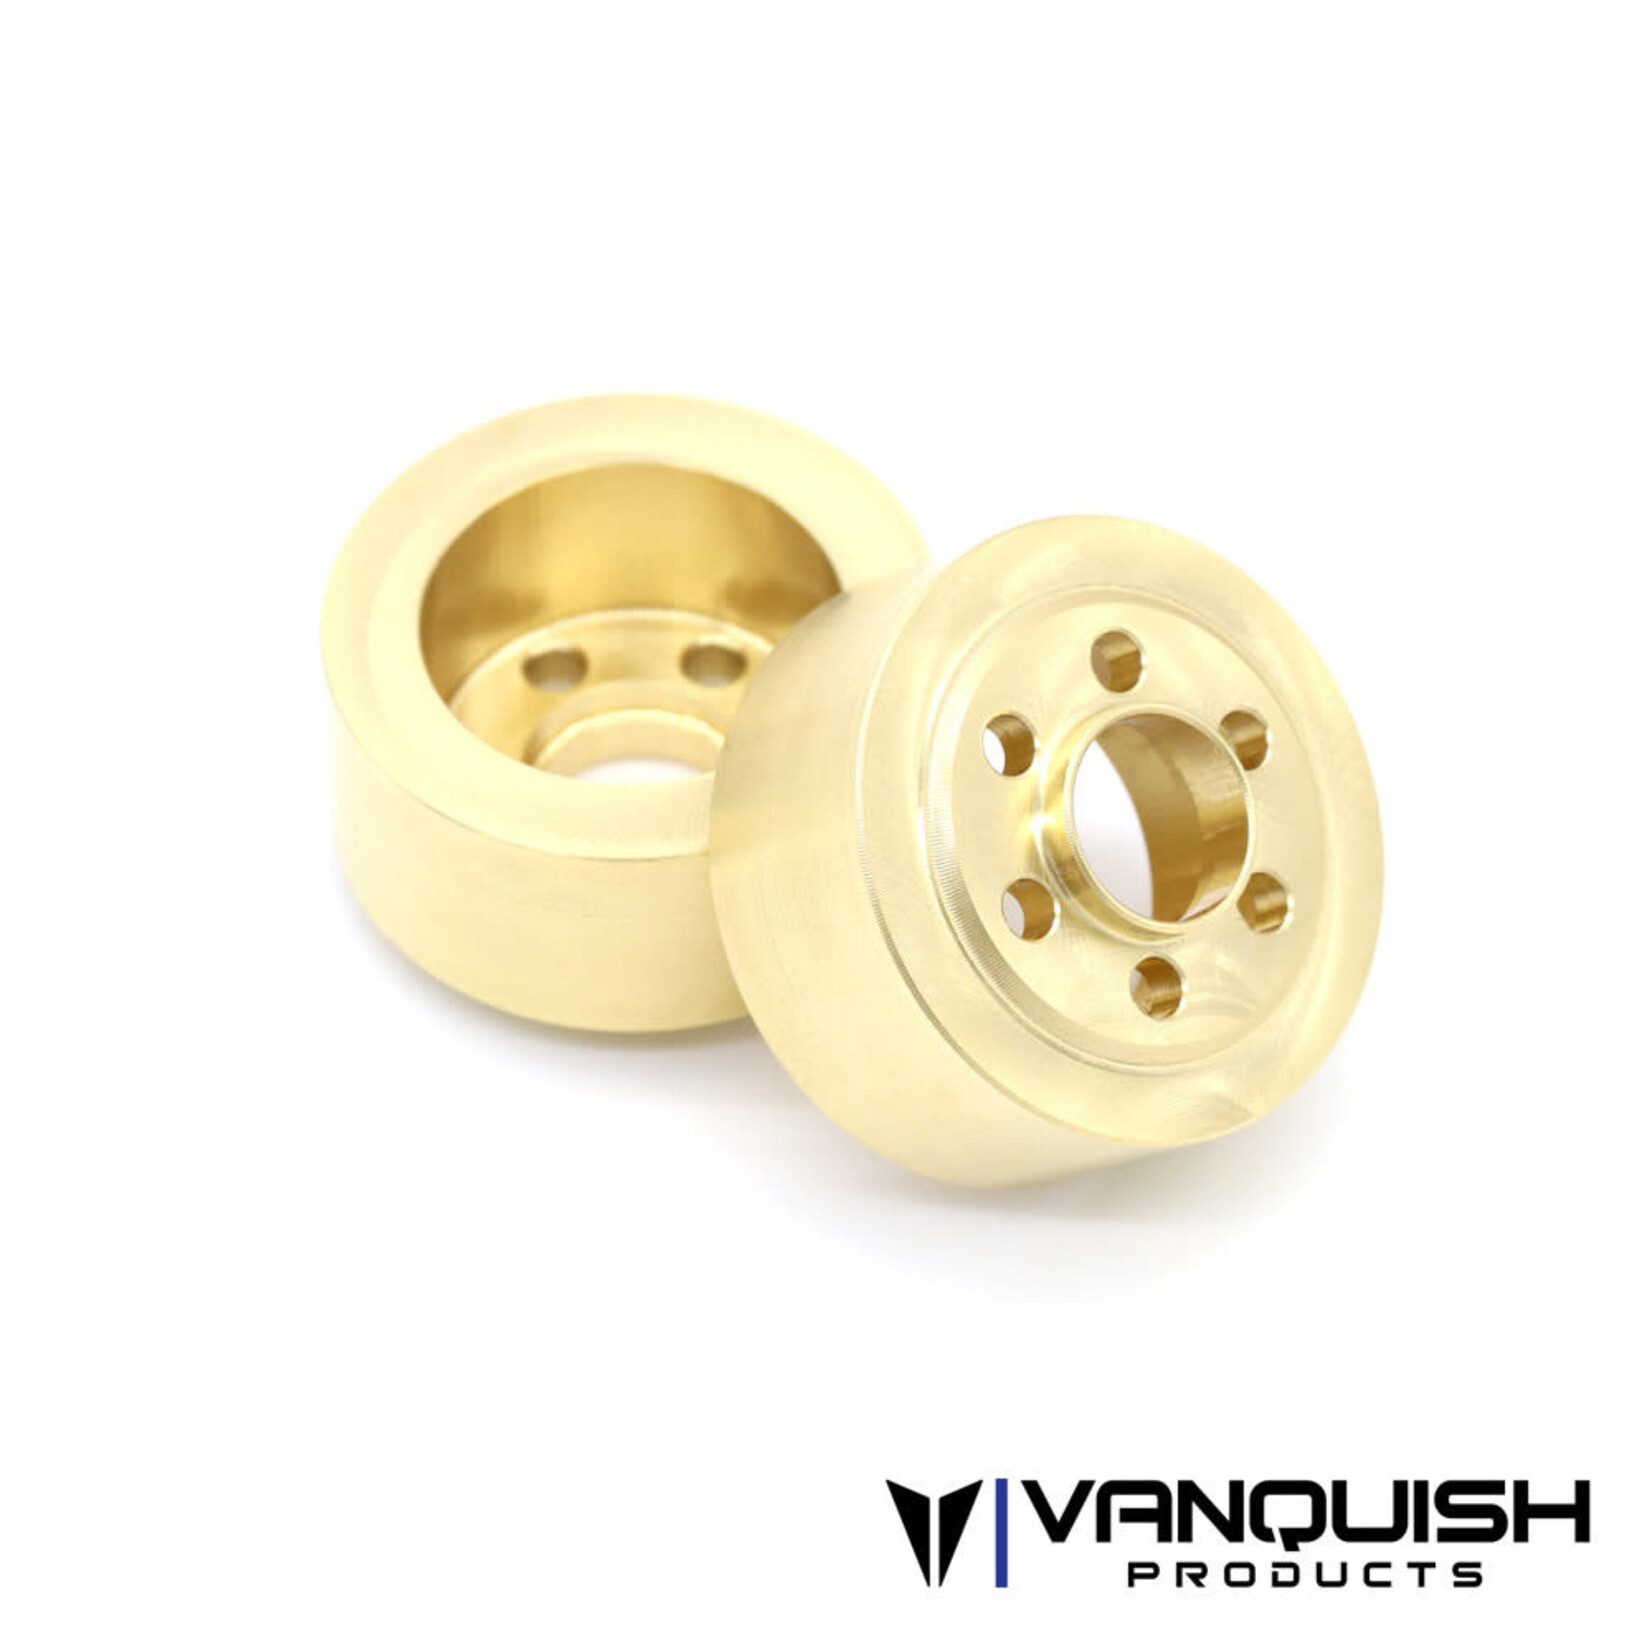 Vanquish Products Vanquish Products 1.9" Brass Brake Disc Weights #VPS04005